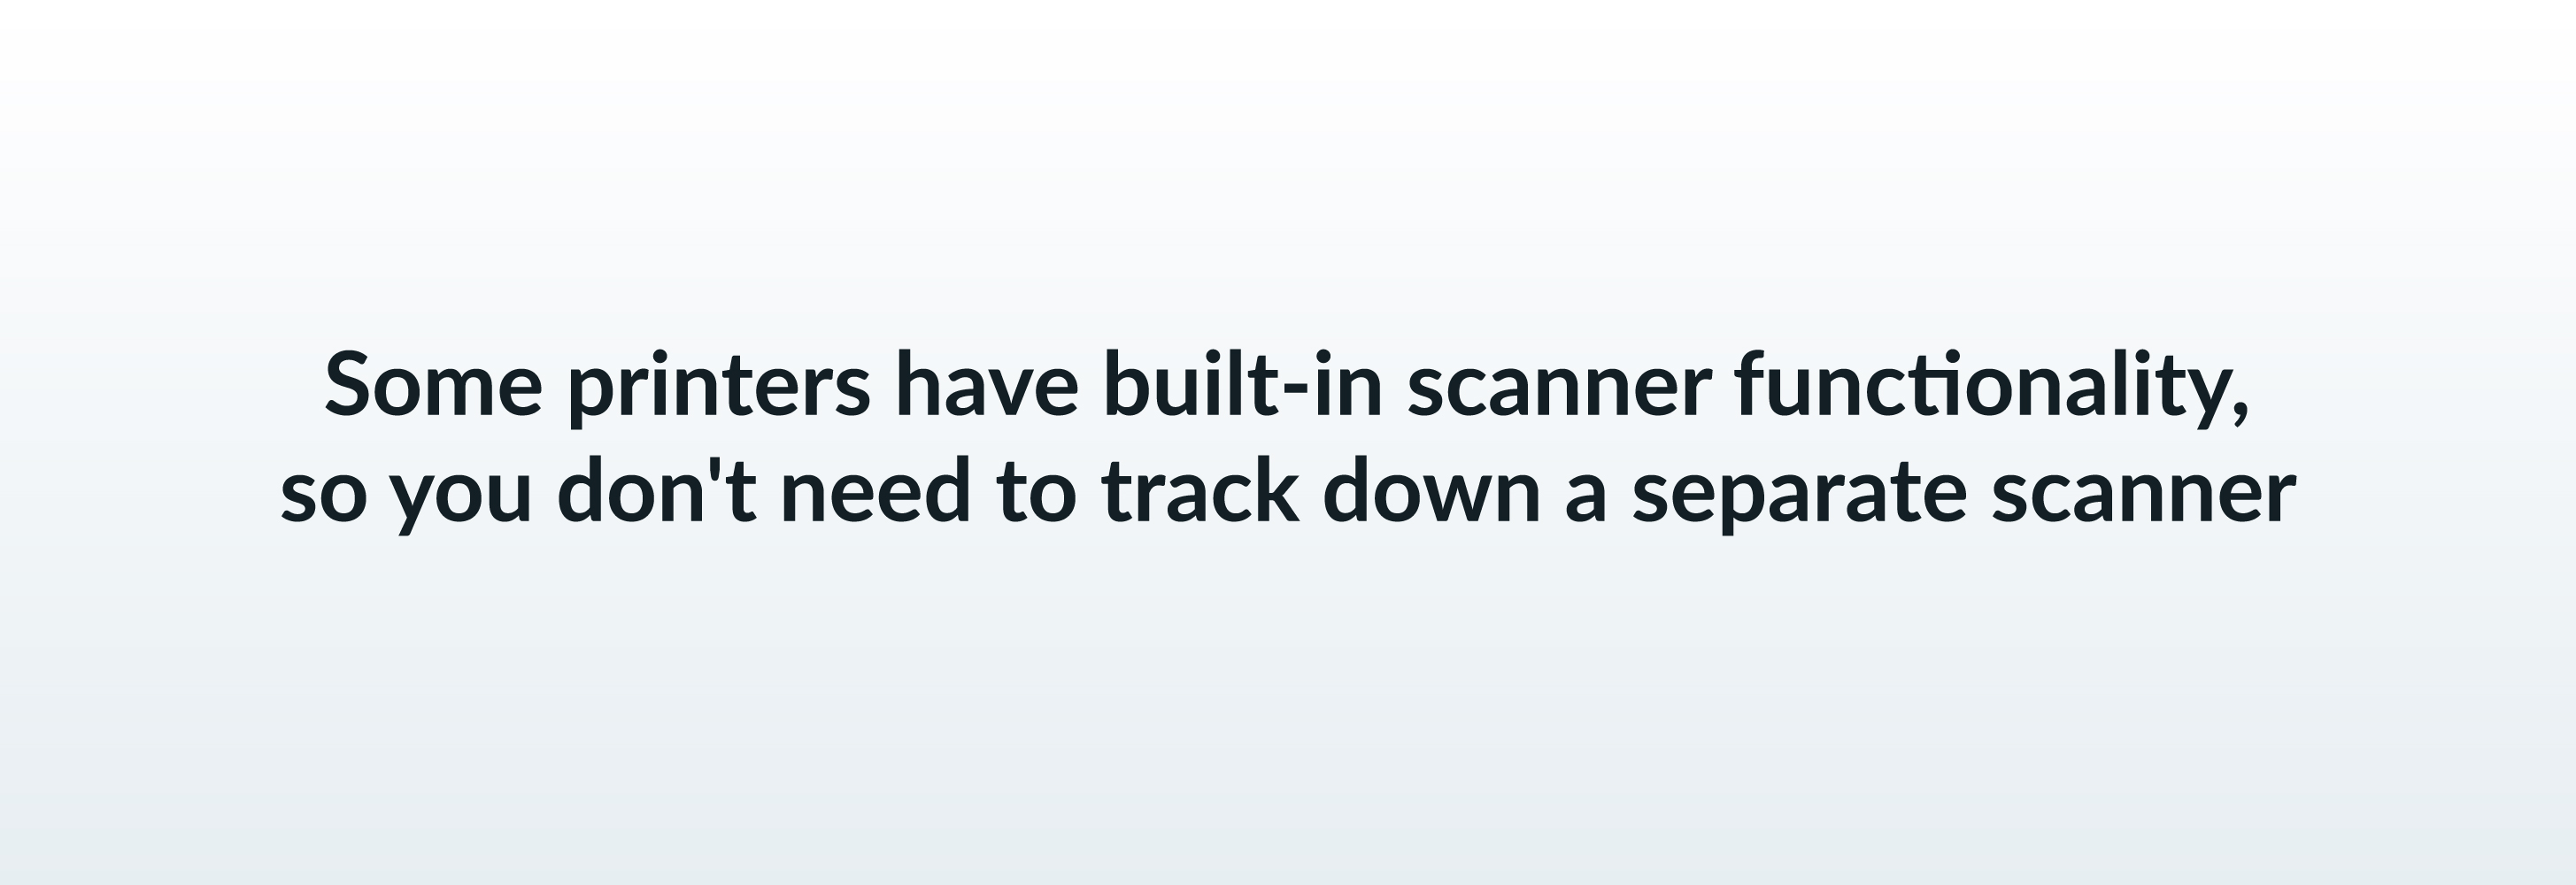 Some printers have built-in scanner functionality, so you don't need to track down a separate scanner